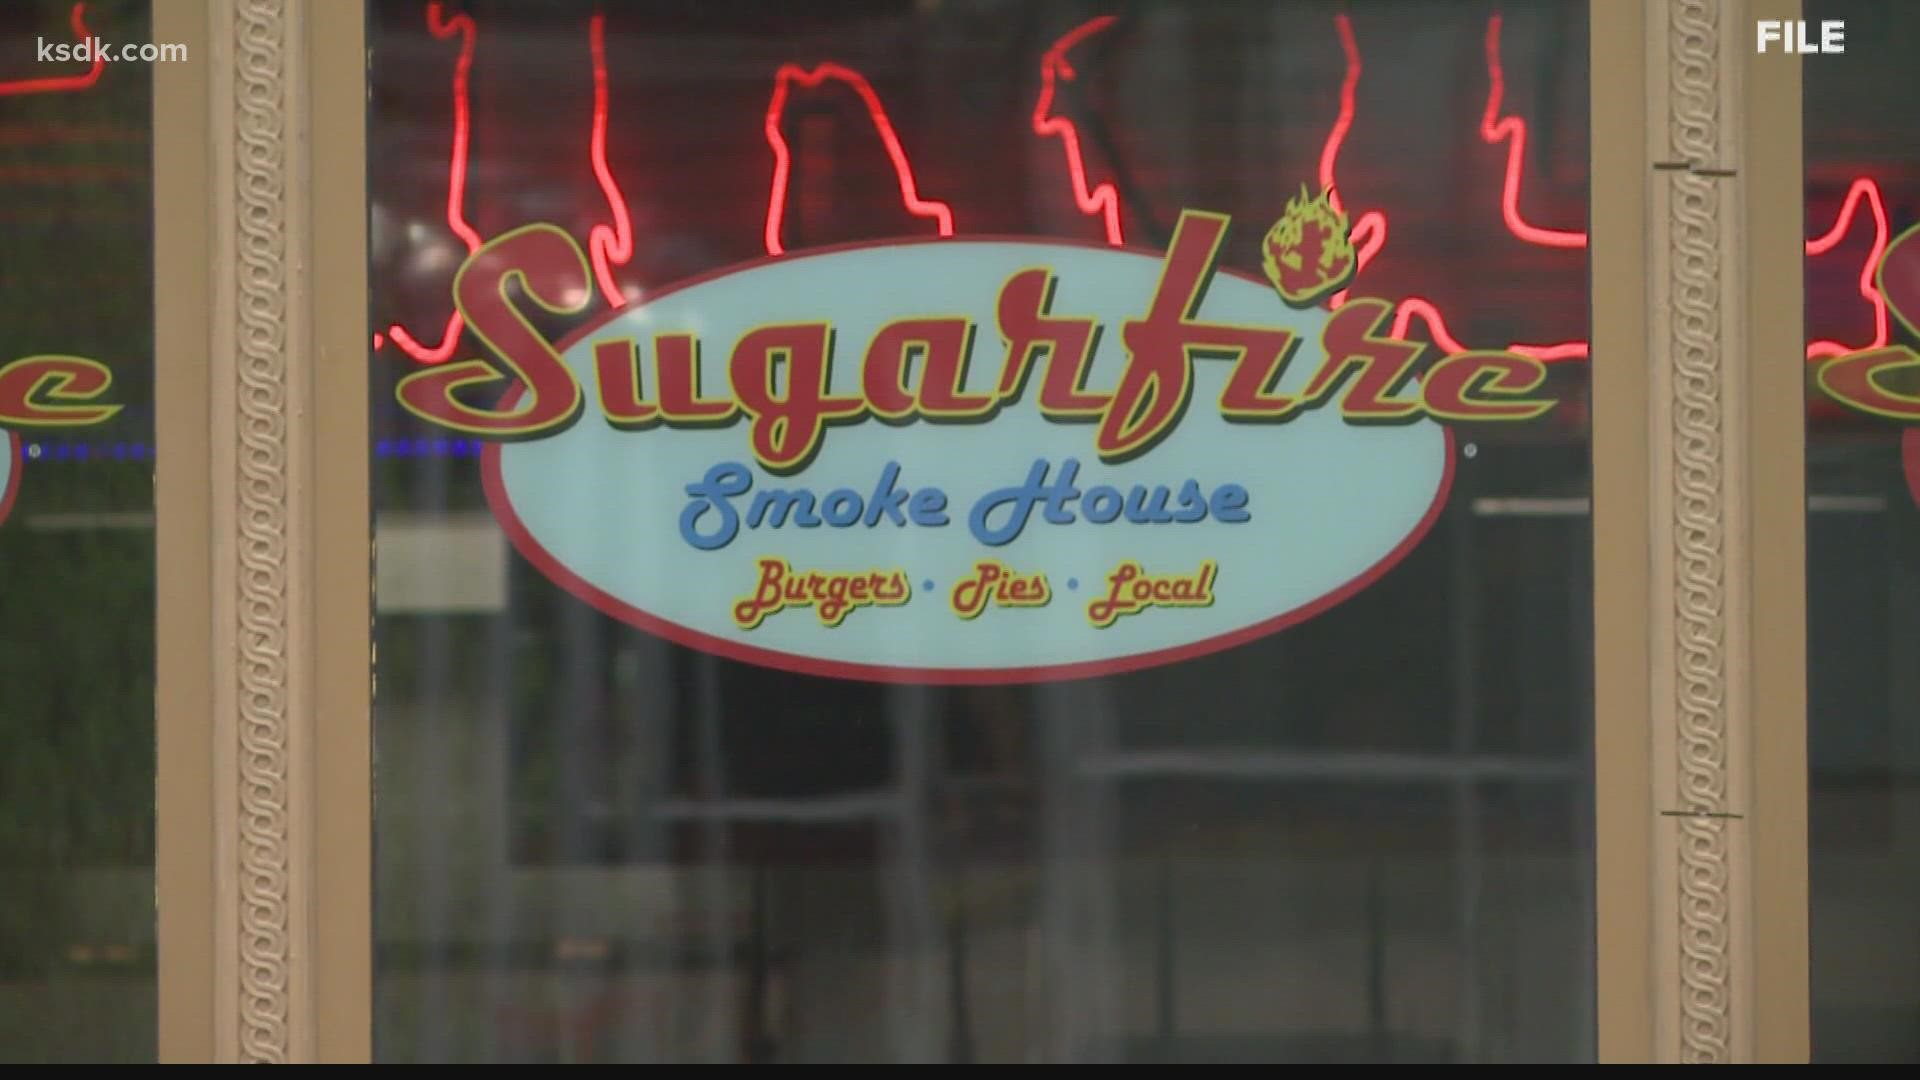 Sugarfire’s Kirkwood restaurant will be its 17th location. It is set to open sometime next year.